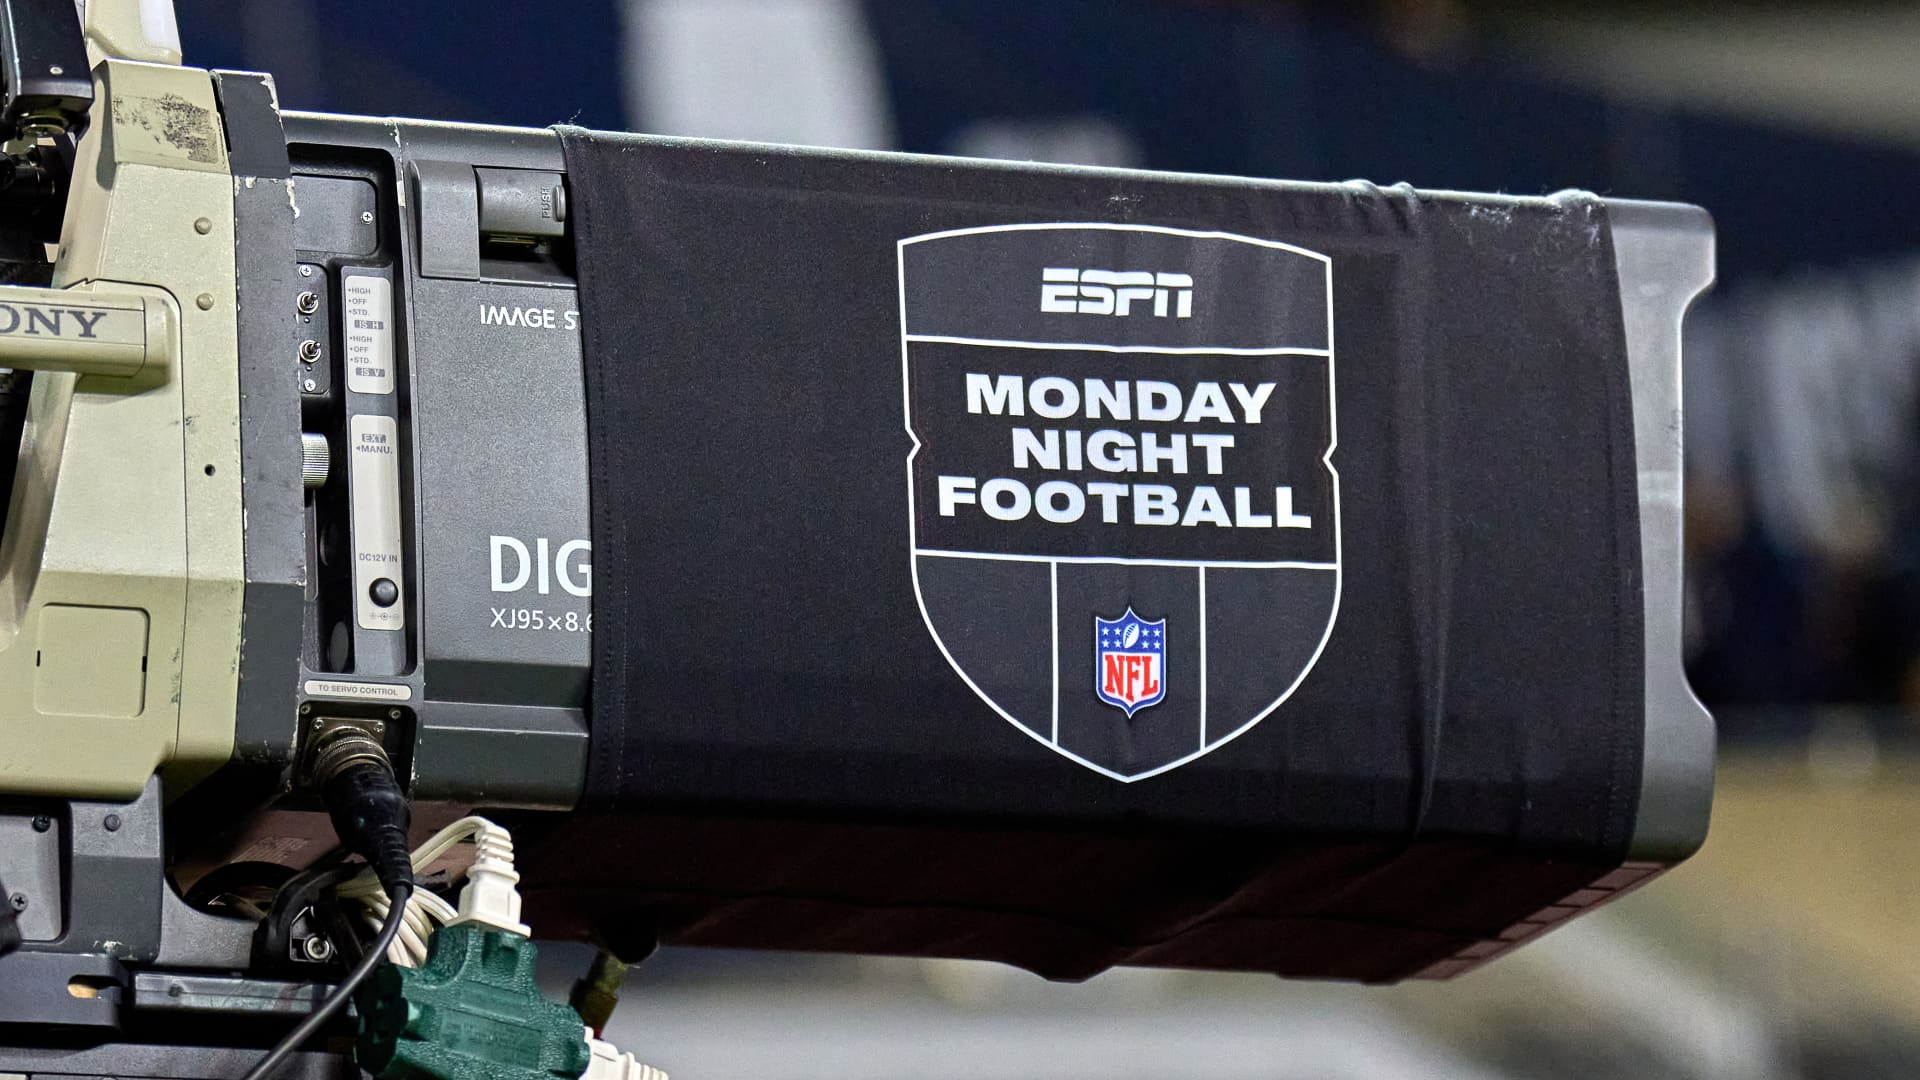 Disney, Charter end blackout ahead of Monday Night Football